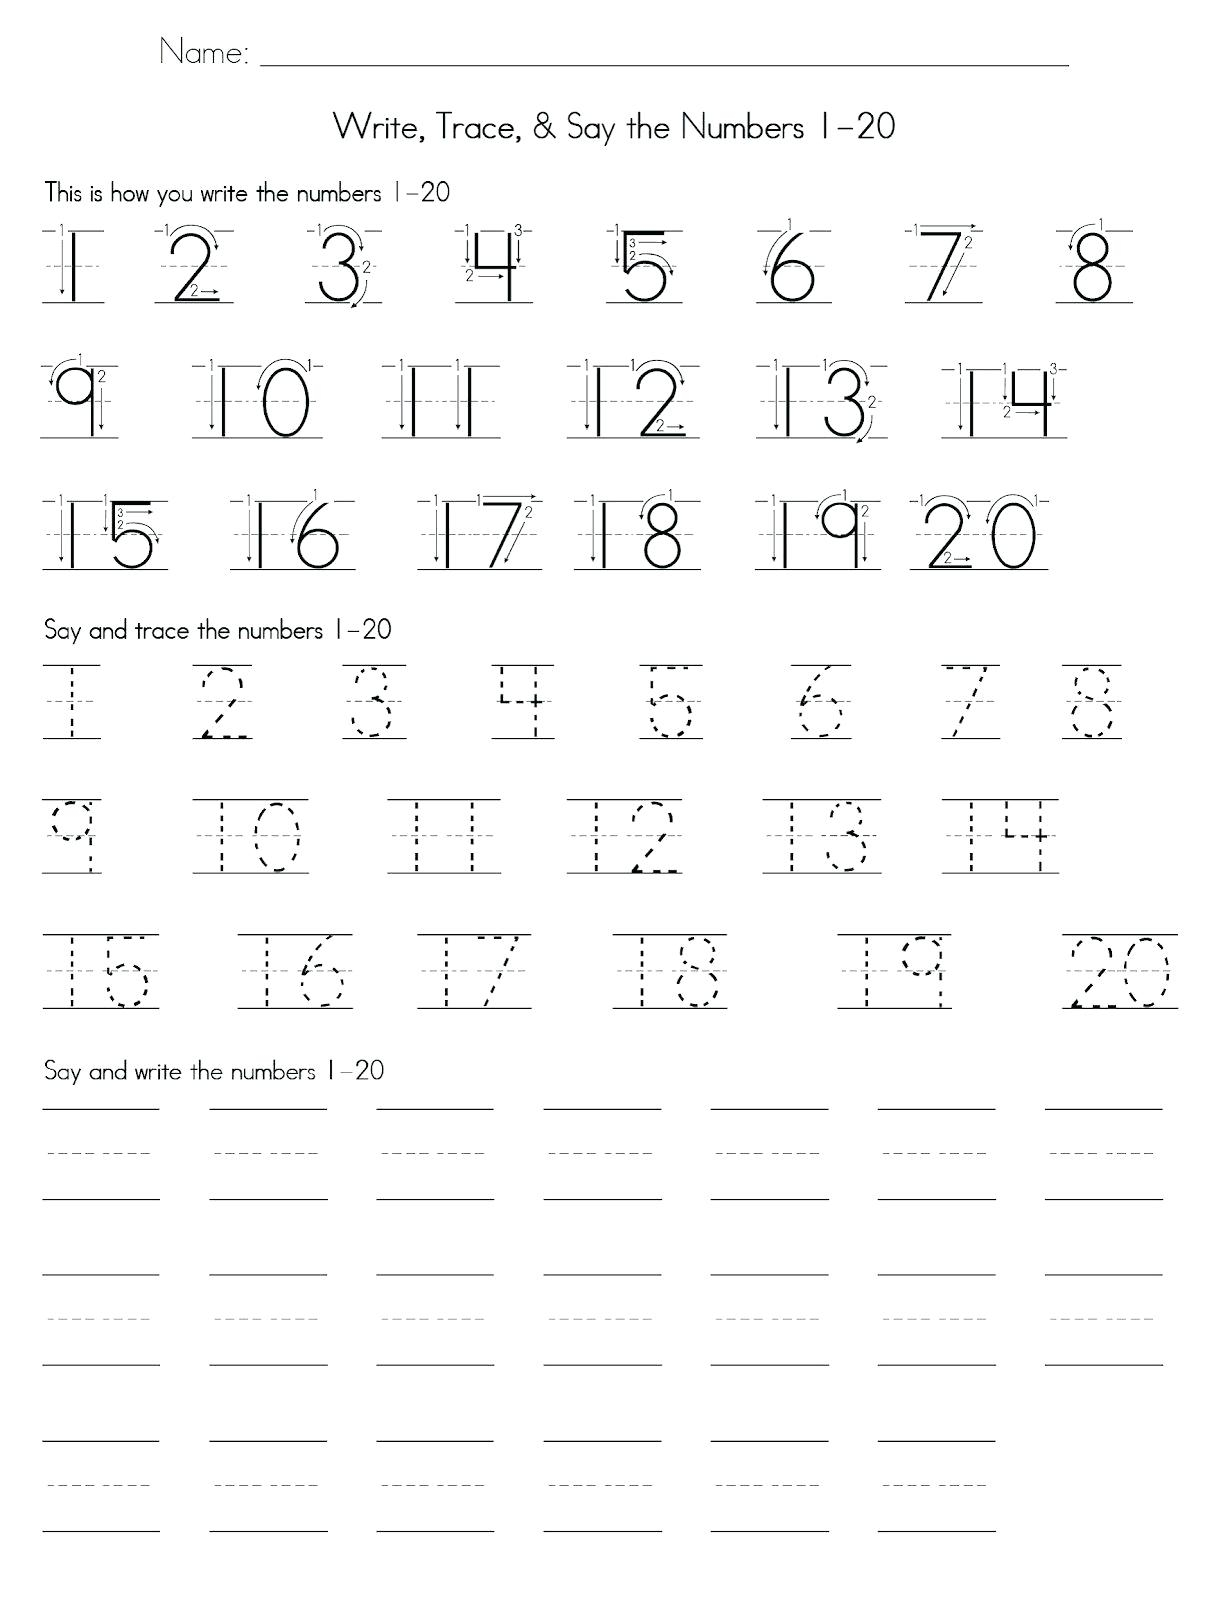 Veganarto: Year 4 English Worksheets. Math Problems For 2Nd